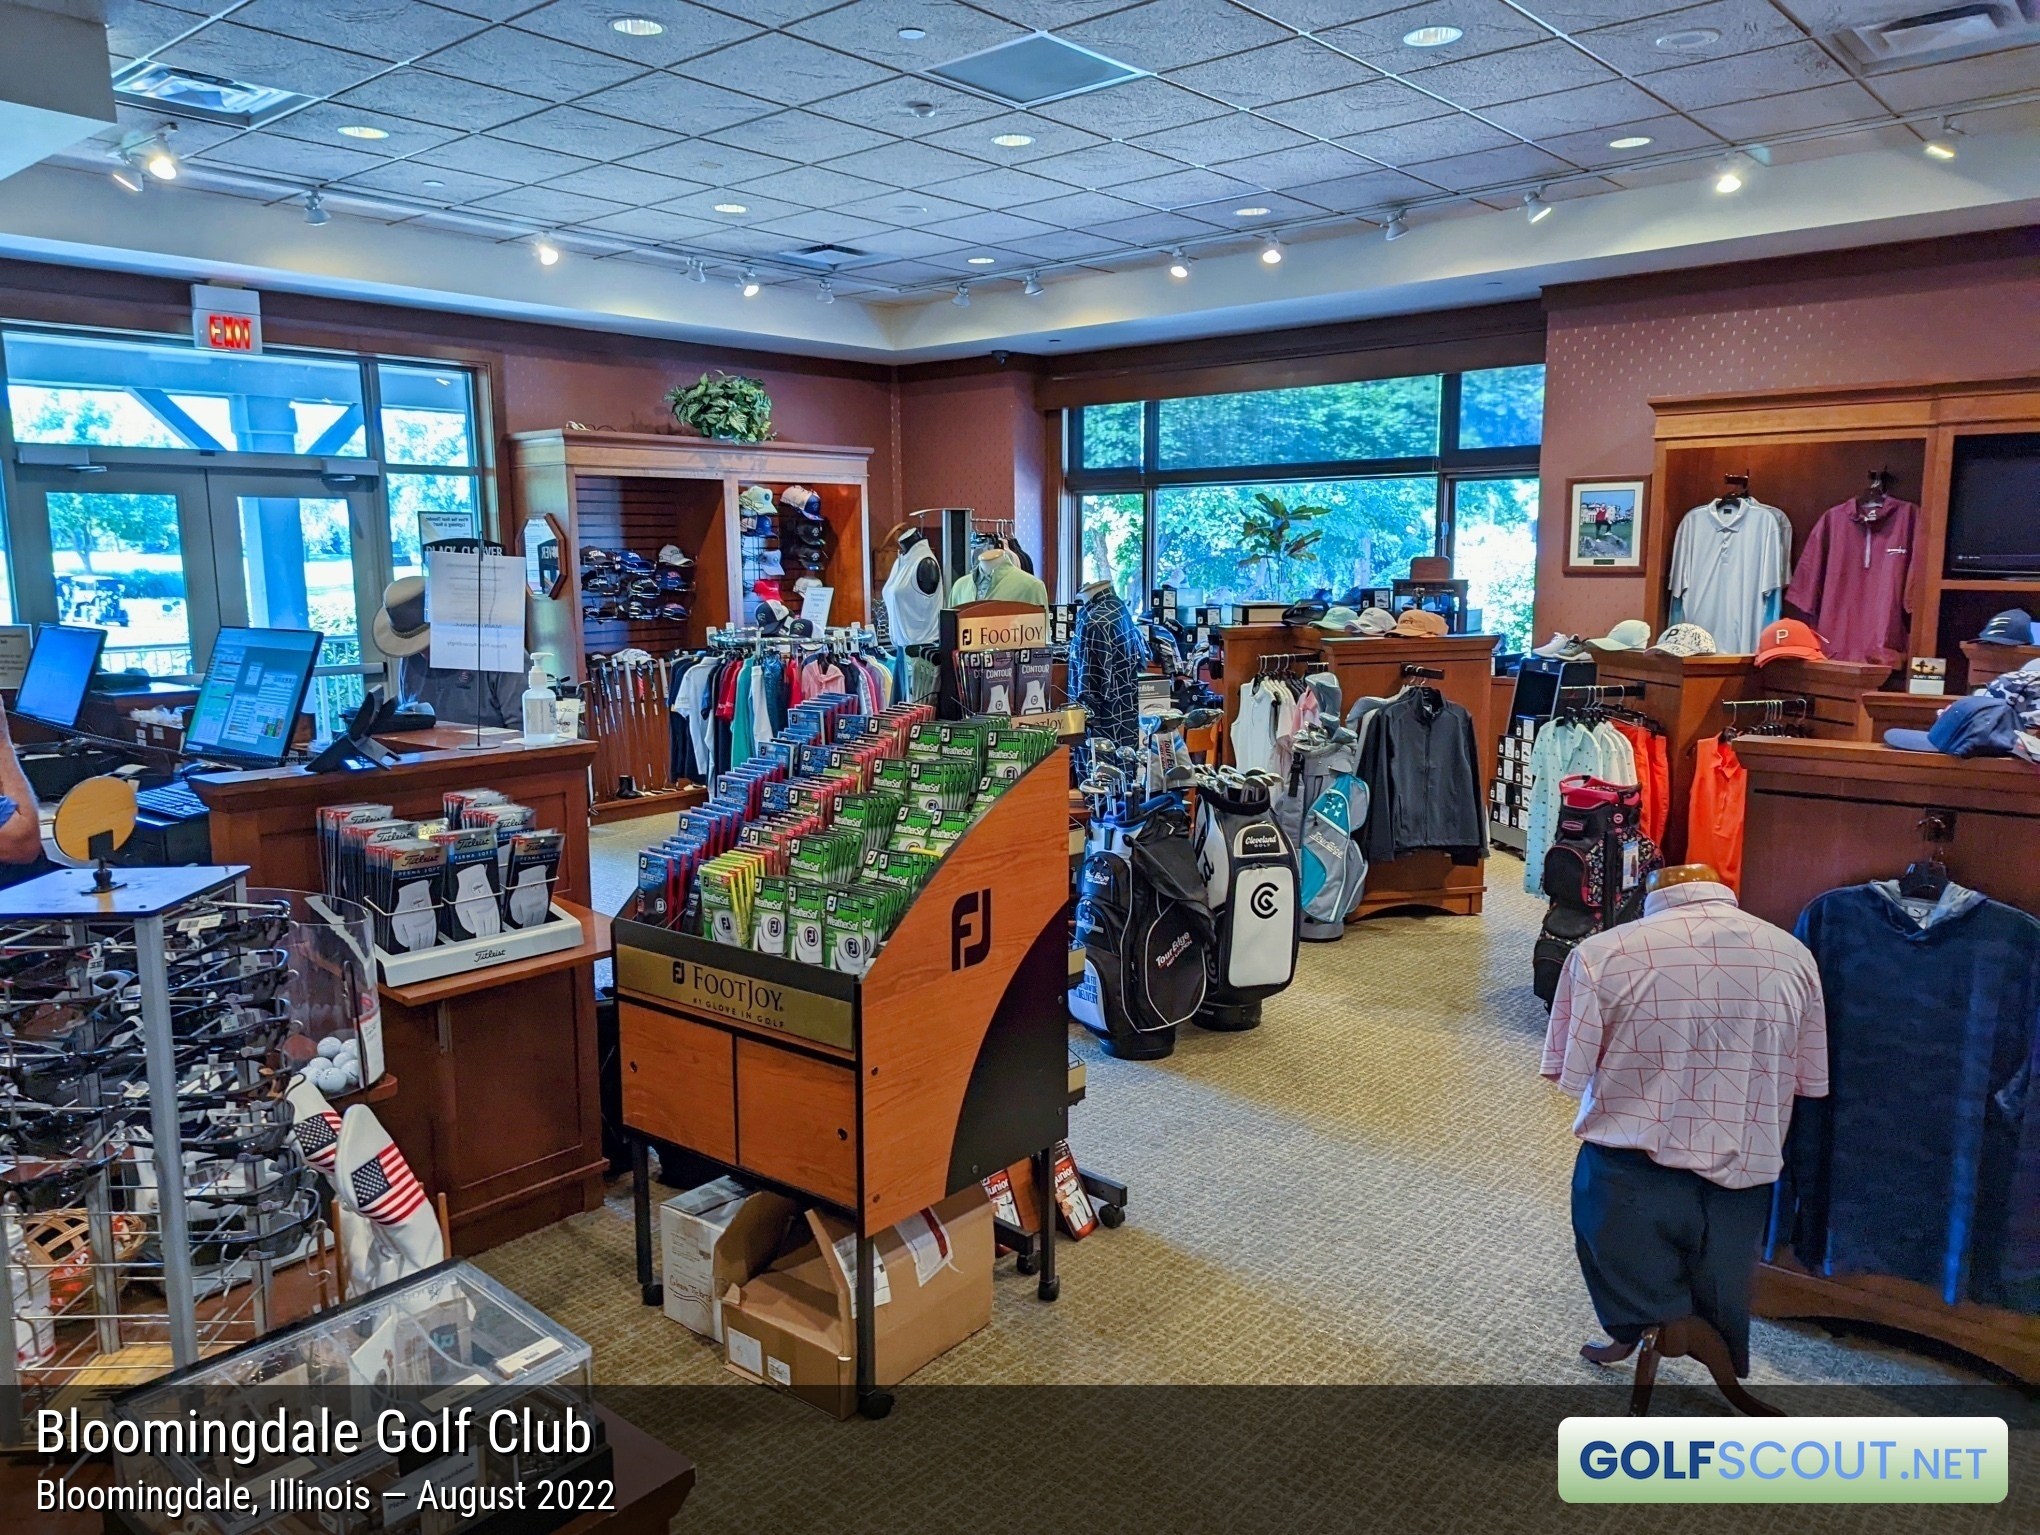 Photo of the pro shop at Bloomingdale Golf Club in Bloomingdale, Illinois. 